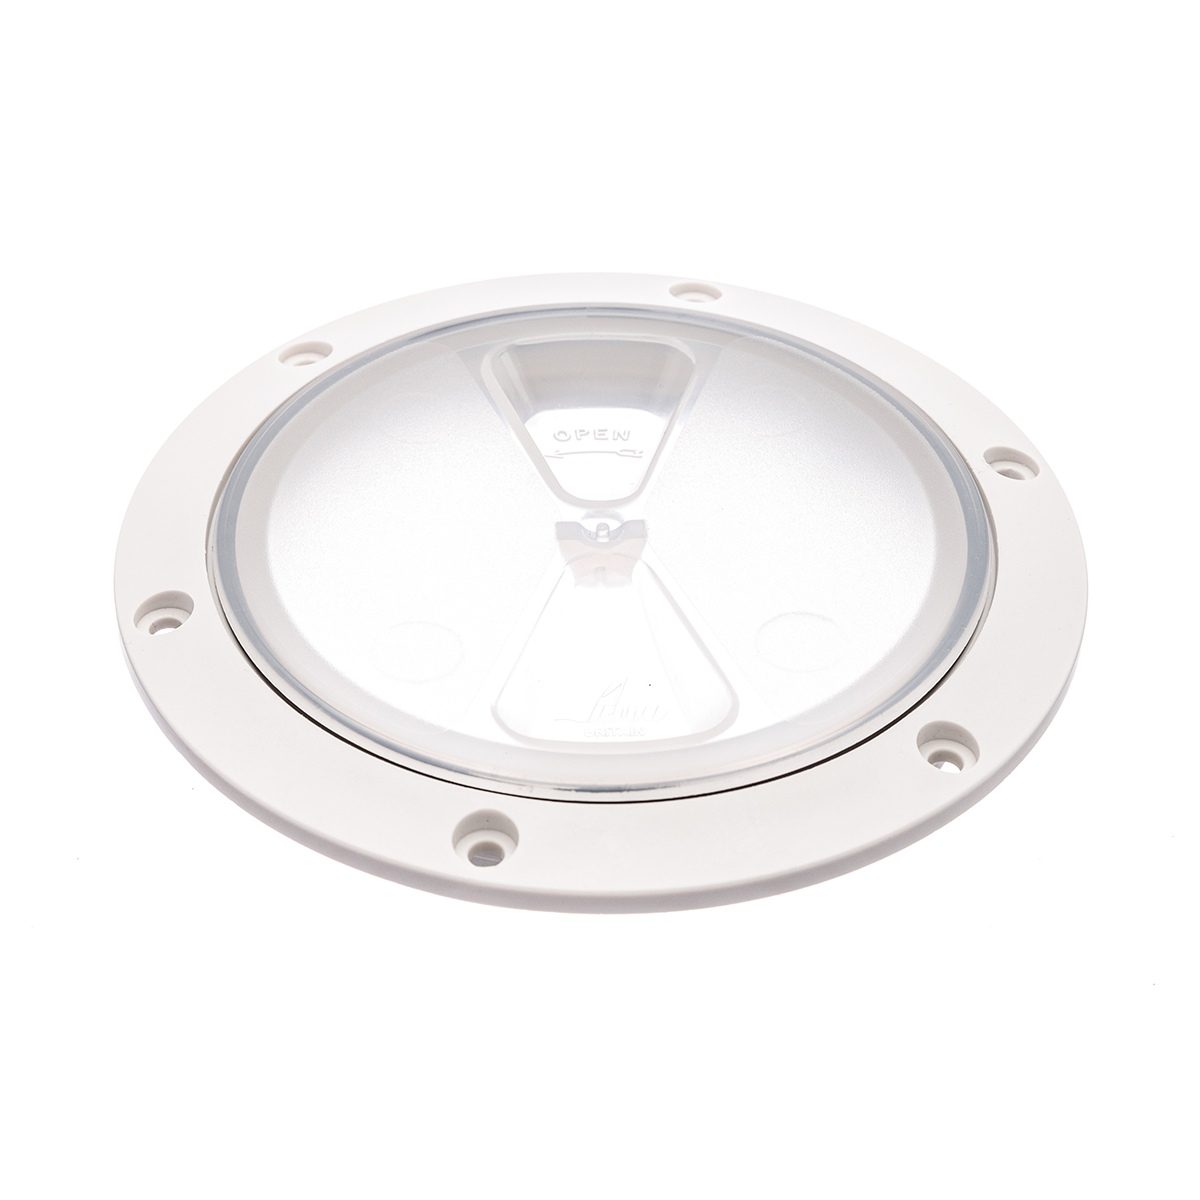 R4043L - Screw Insp Cover 100mm  (Clear/White) (Pk Size: 1)